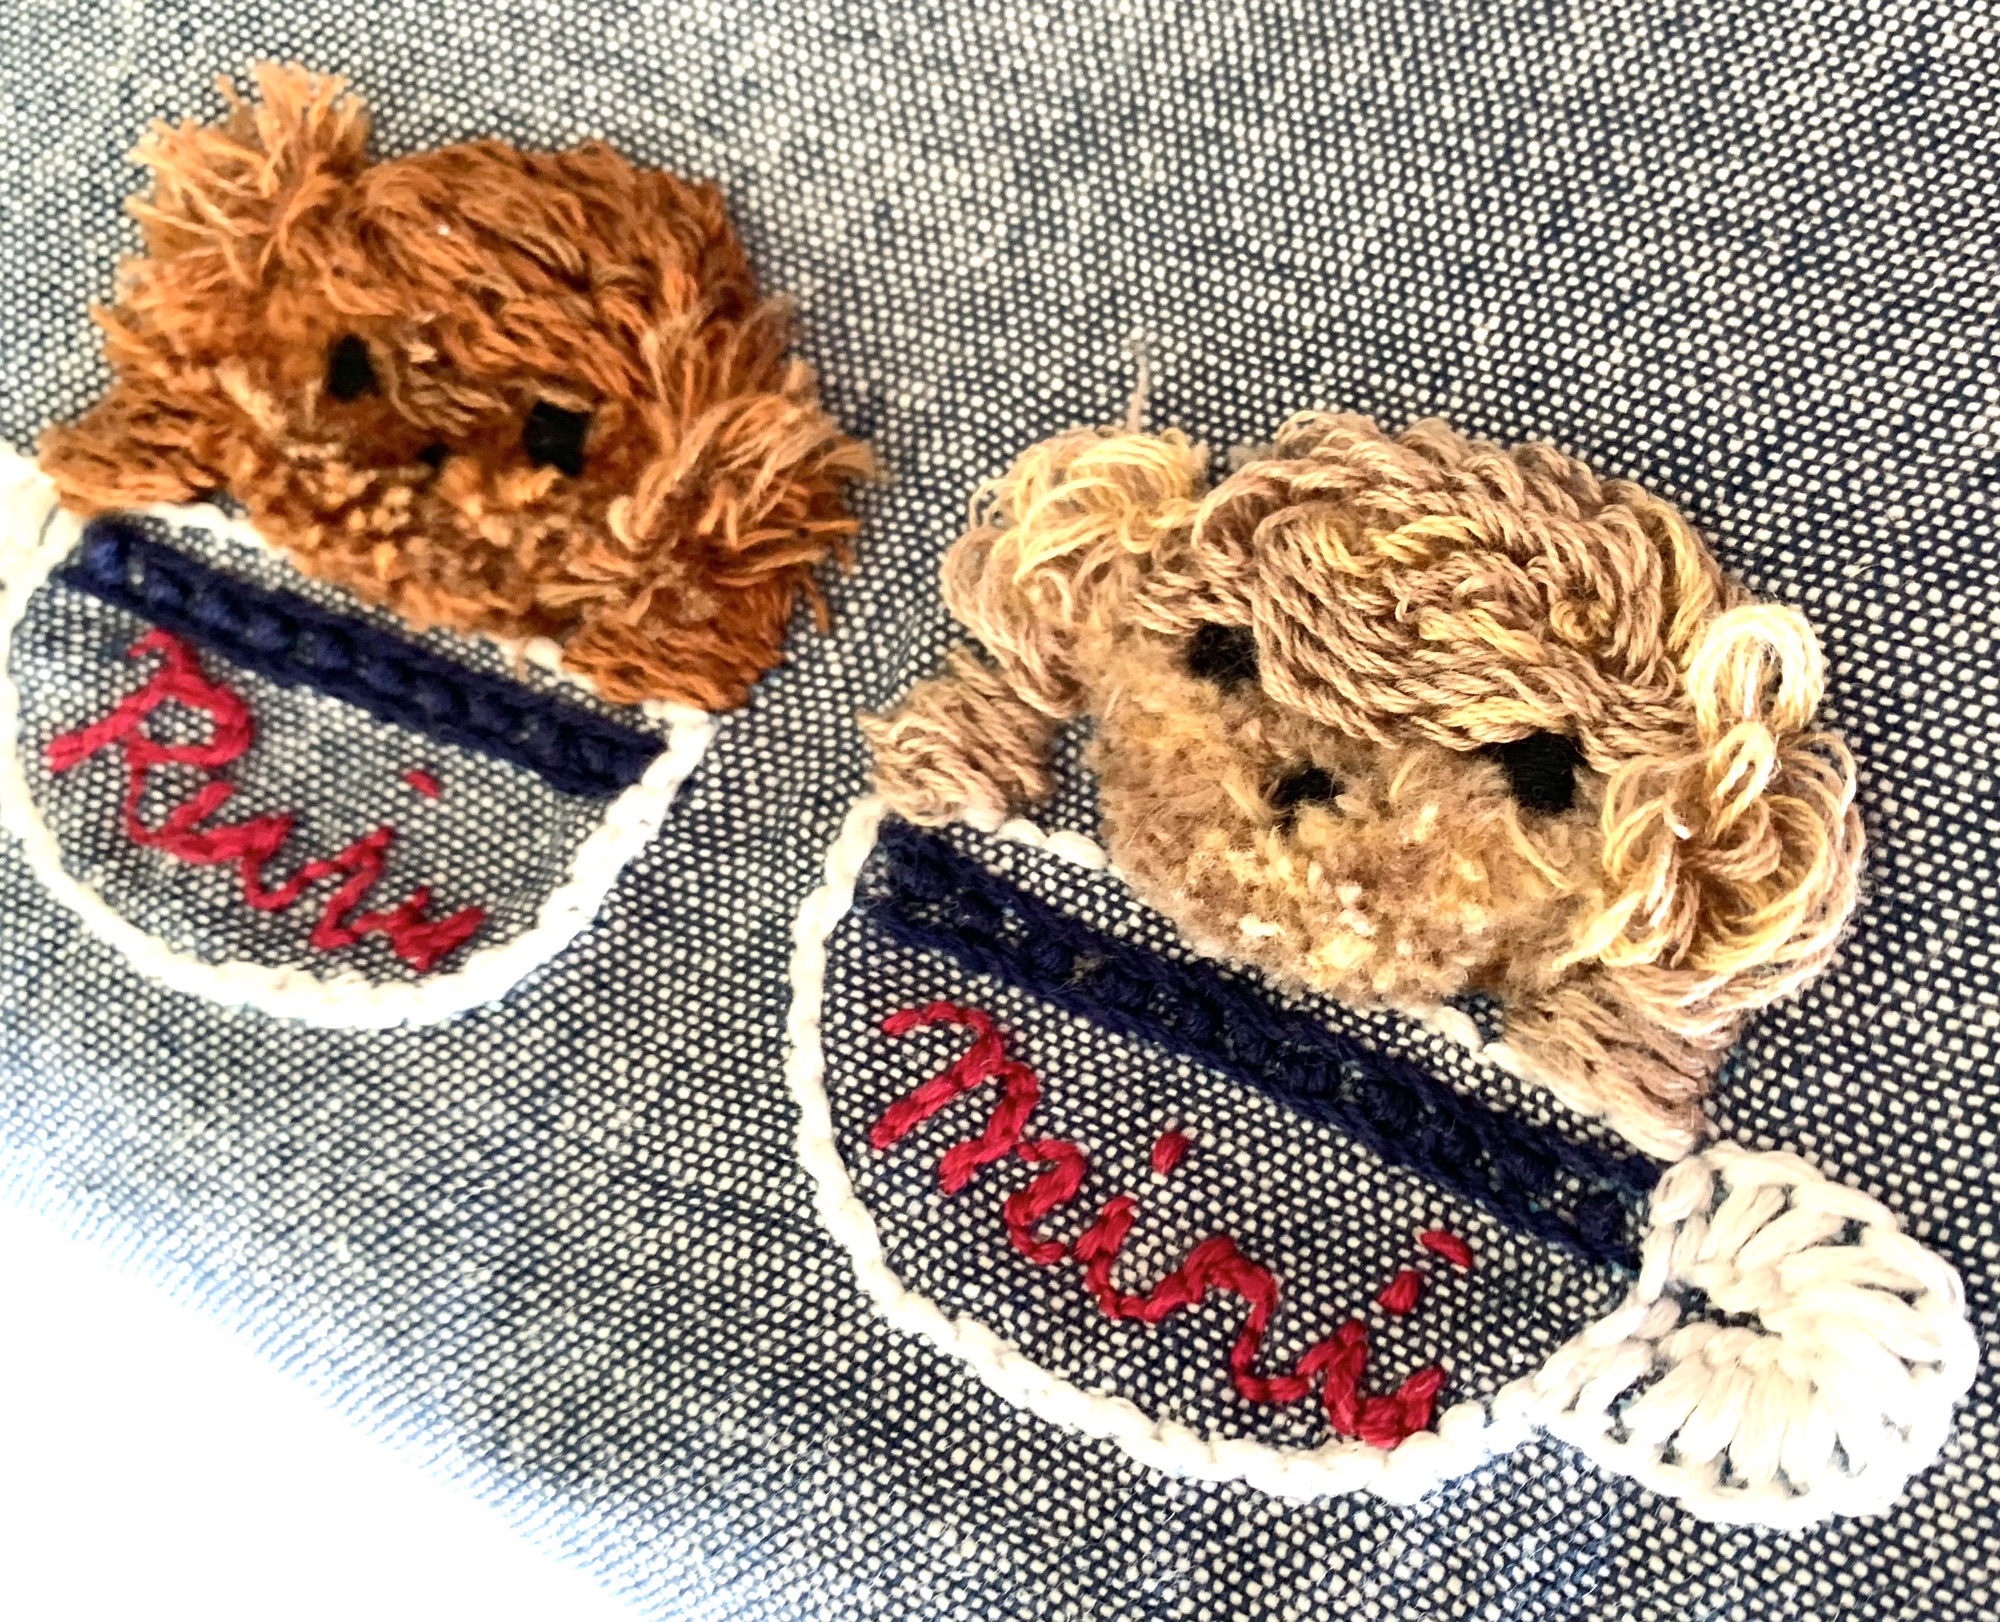 Broderier for alle:Lis Paludan みんなのための刺繍-